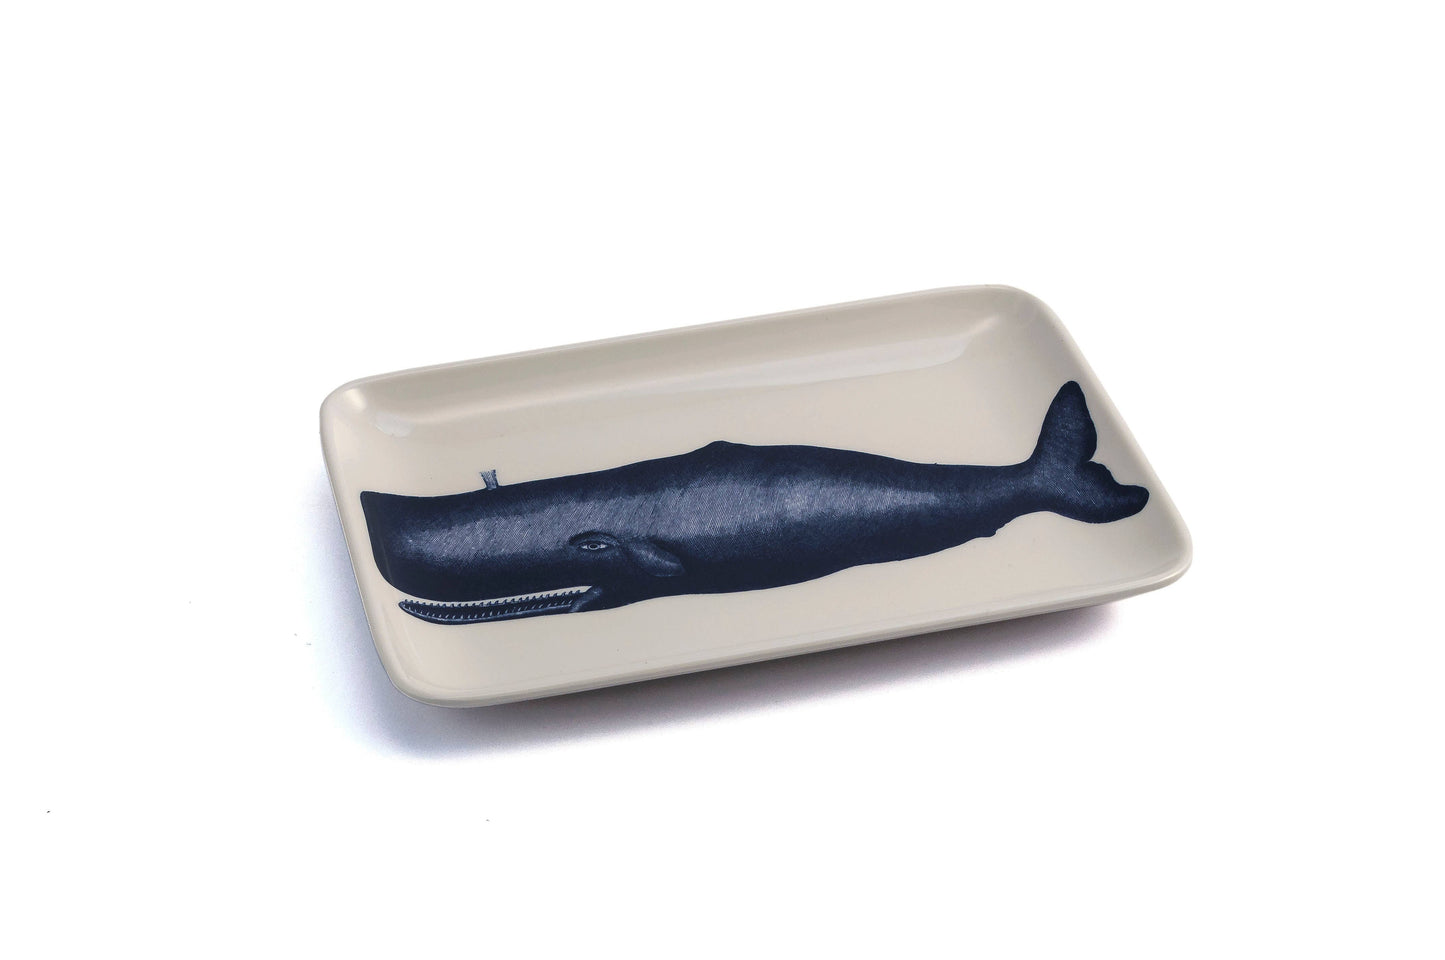 Whale Soap Dish/Small Tray